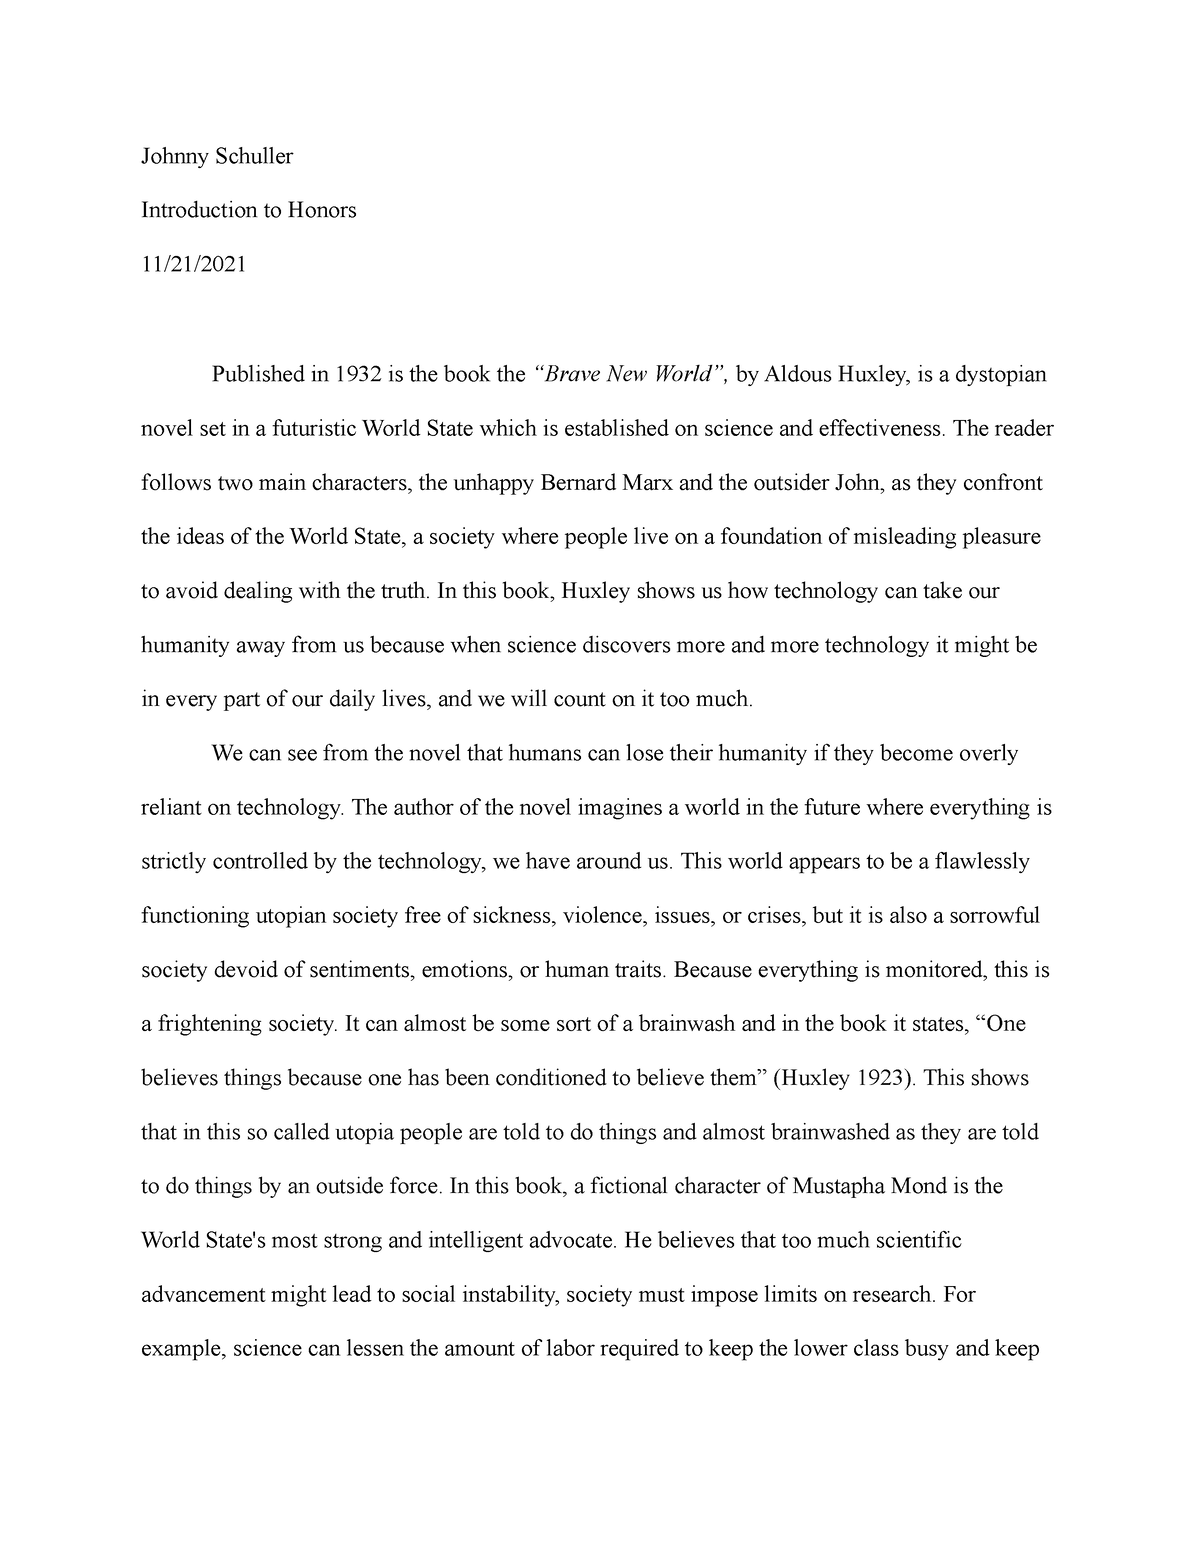 njit honors college essay example